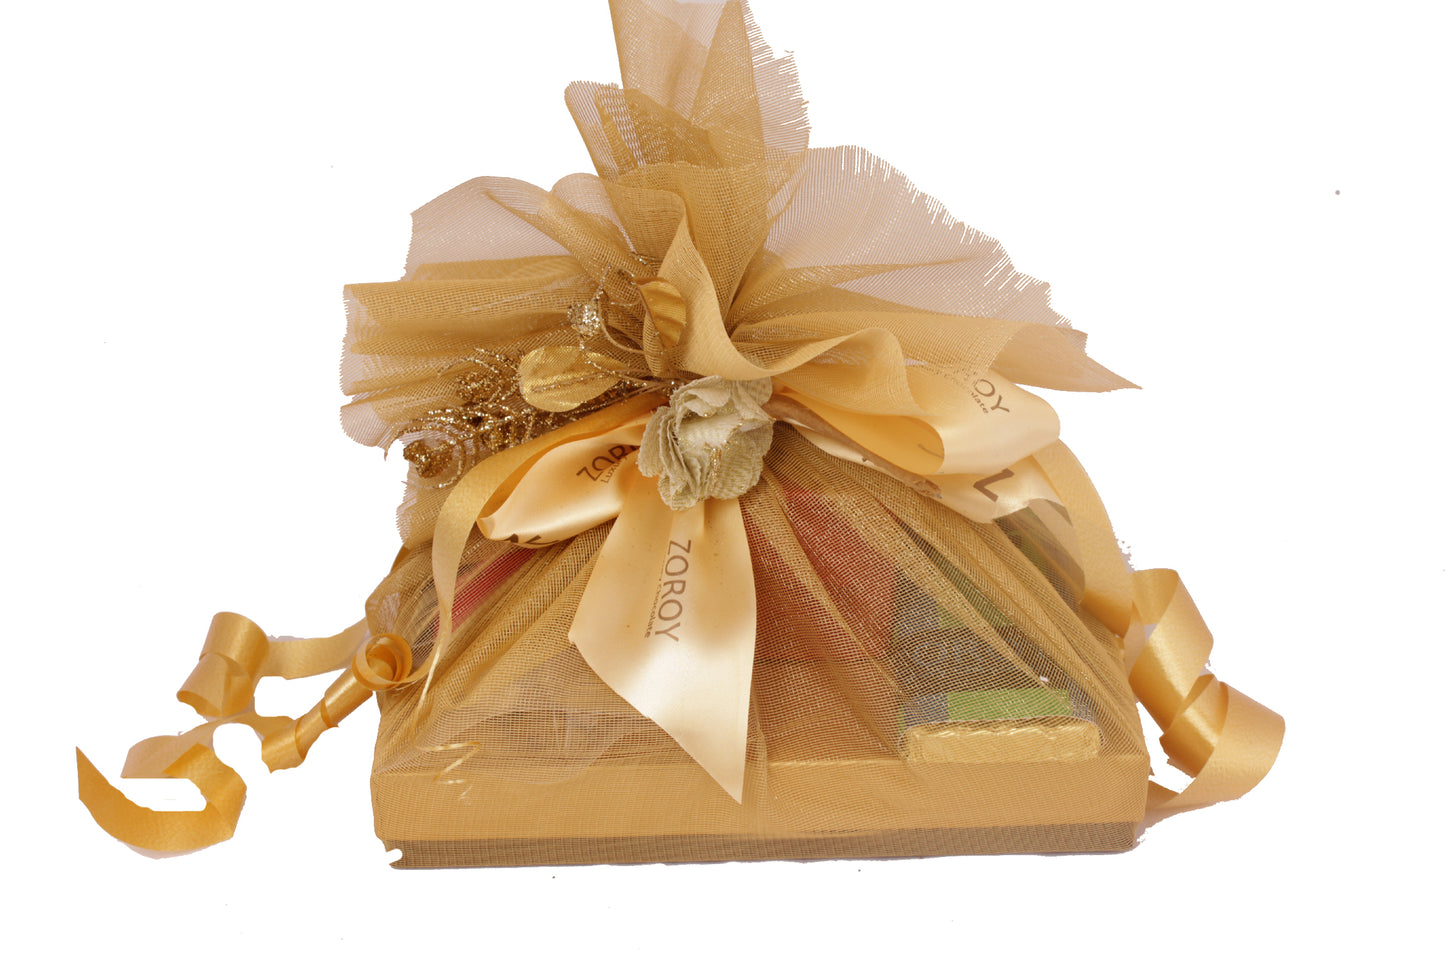 ZOROY Mini Gold Netted Hamper with chocolates, dry fruits and candle